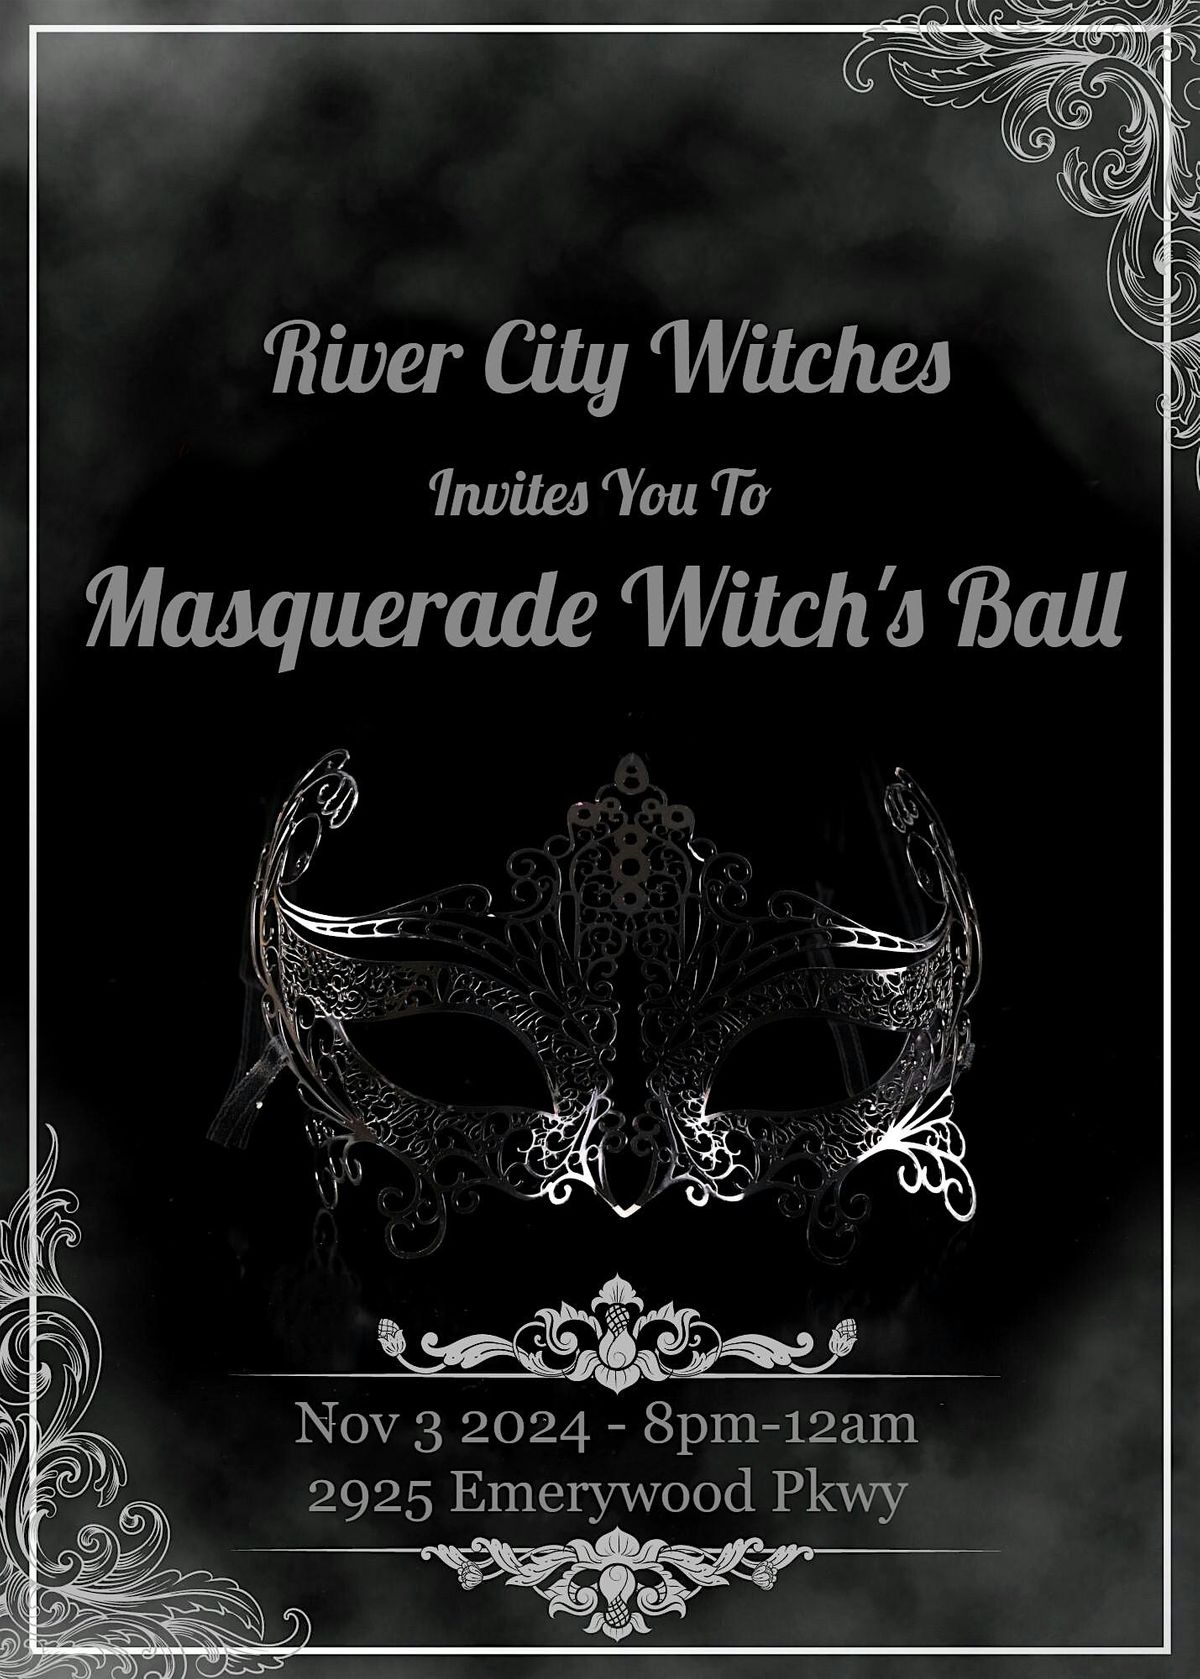 Masquerade Witch's Ball